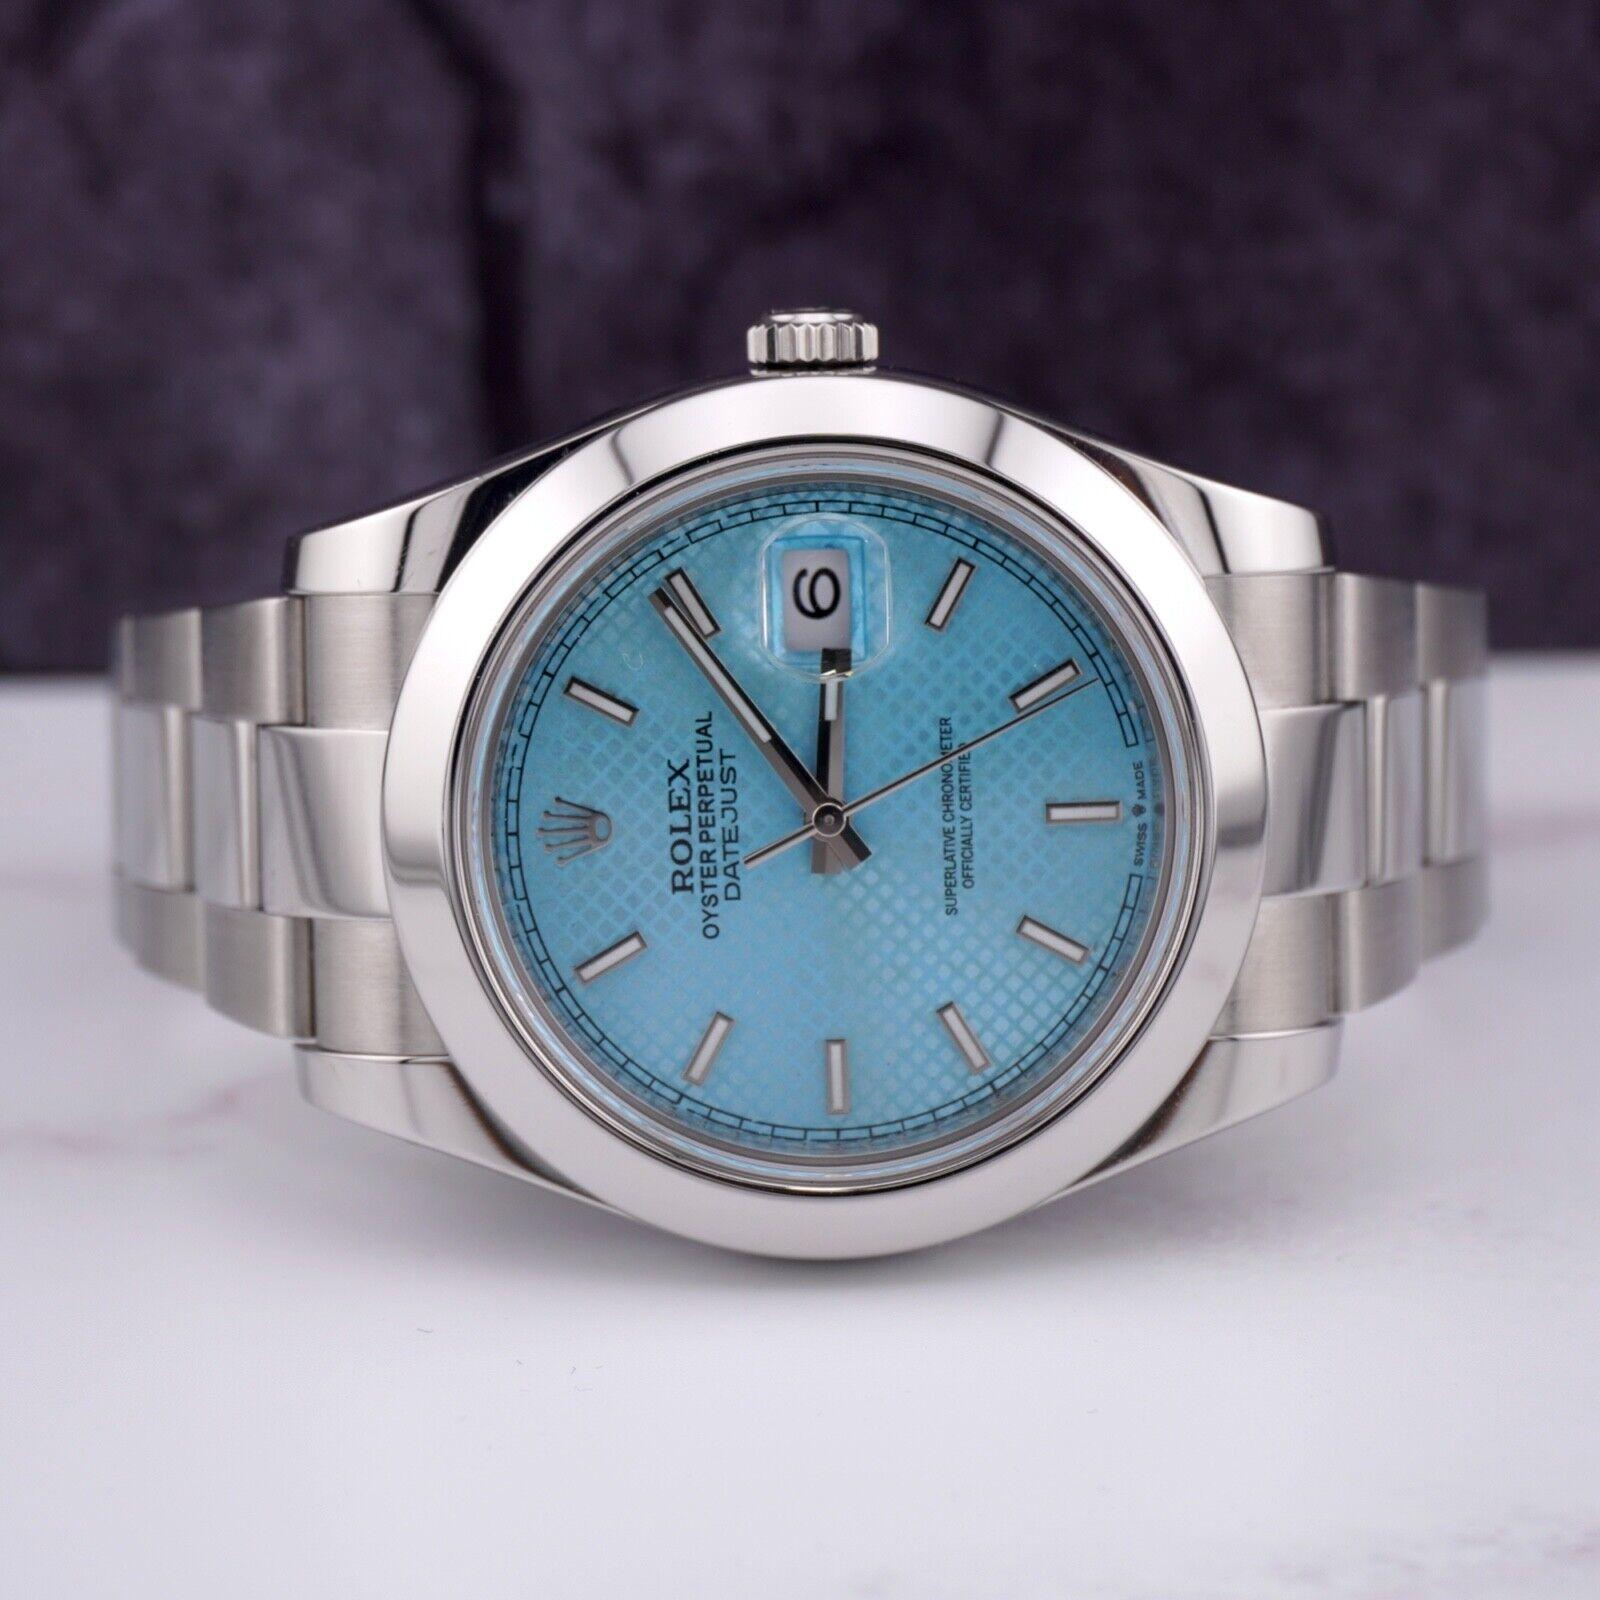 Rolex Datejust 41mm Watch. A Pre-owned watch w/ Original Box and 2013 Papers. Watch is 100% Authentic and Comes with Authenticity Card. Watch Reference is 116300 and is in Excellent Condition (See Pictures). The Dial color is Ice-Blue and material